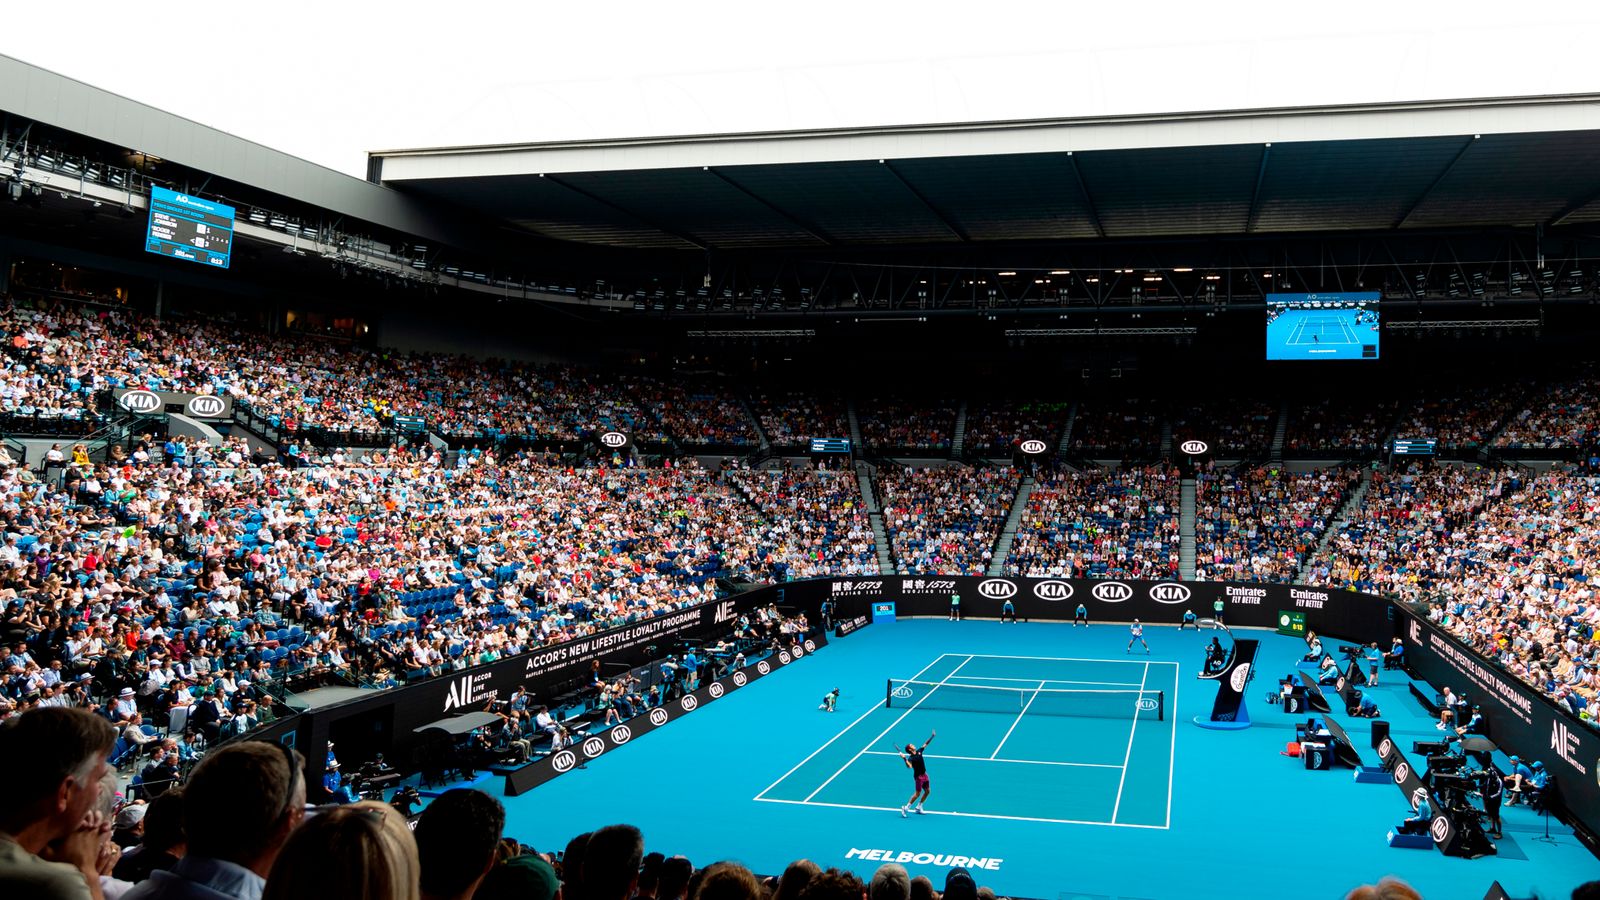 Australian Open Order of Play for Sunday with Rafael Nadal taking on